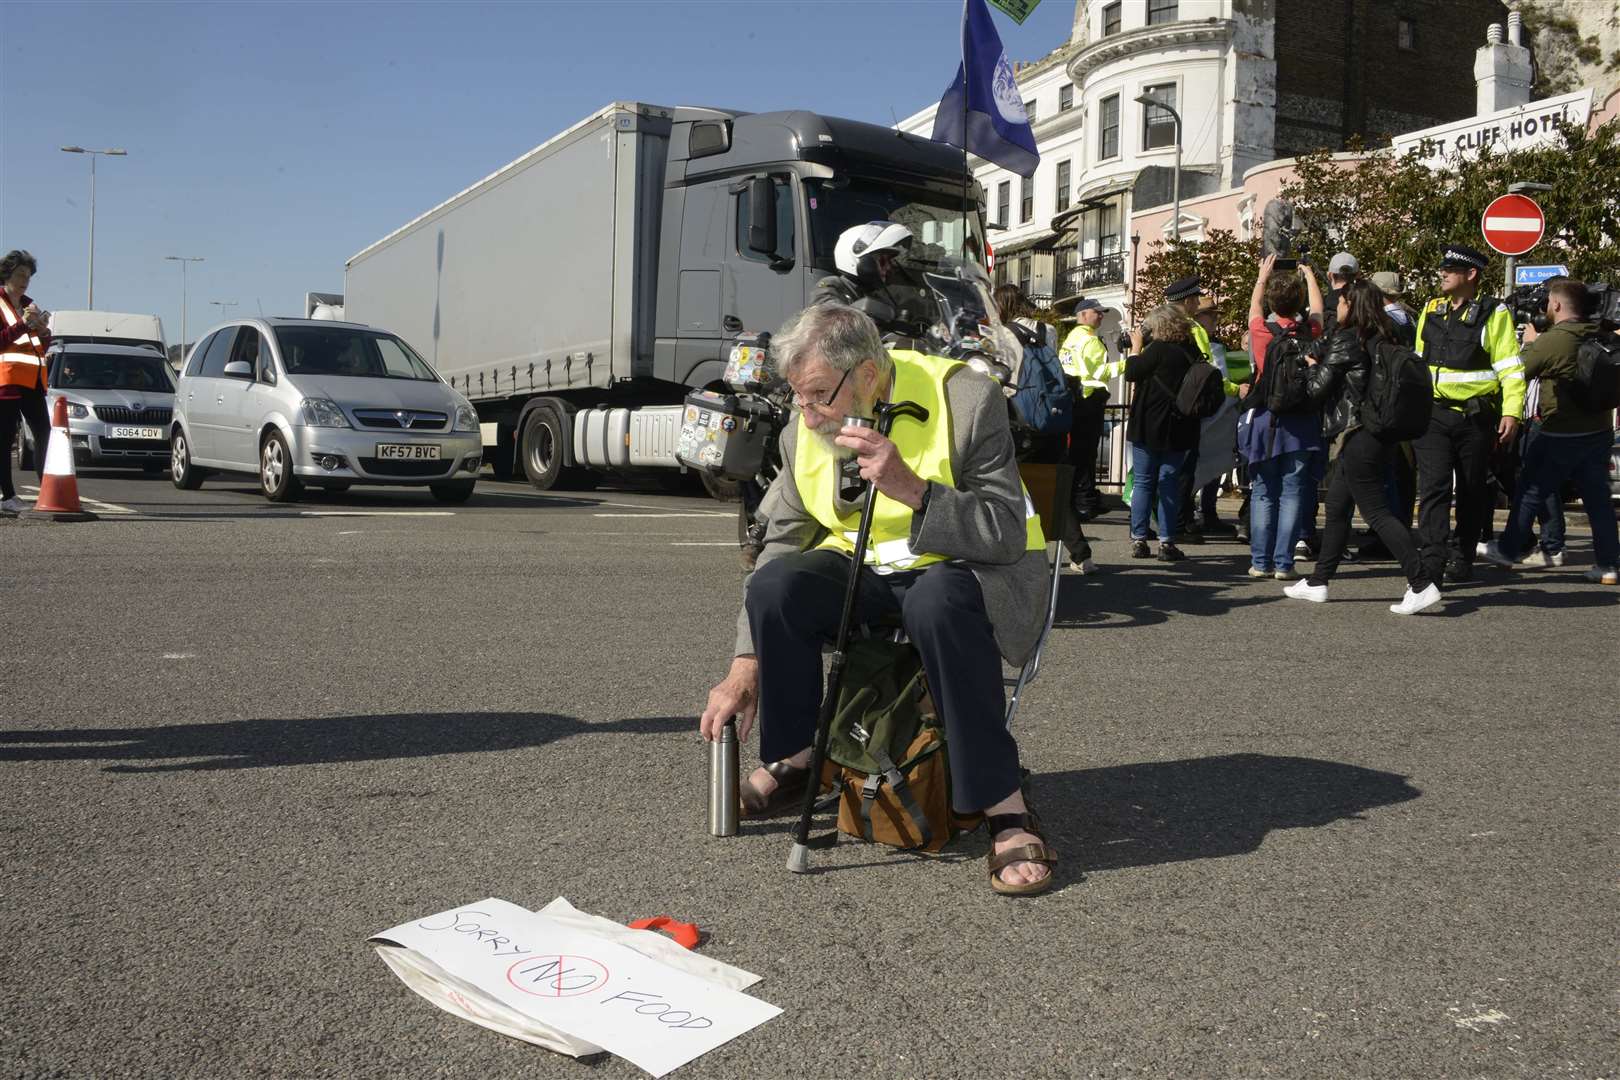 Dover Townwall street to Dover docks Extinction Rebellion protest.91 year old John Lymes sits down on the entrance to the port and sips his tea, blocking the road.Picture: Paul Amos. (17136702)